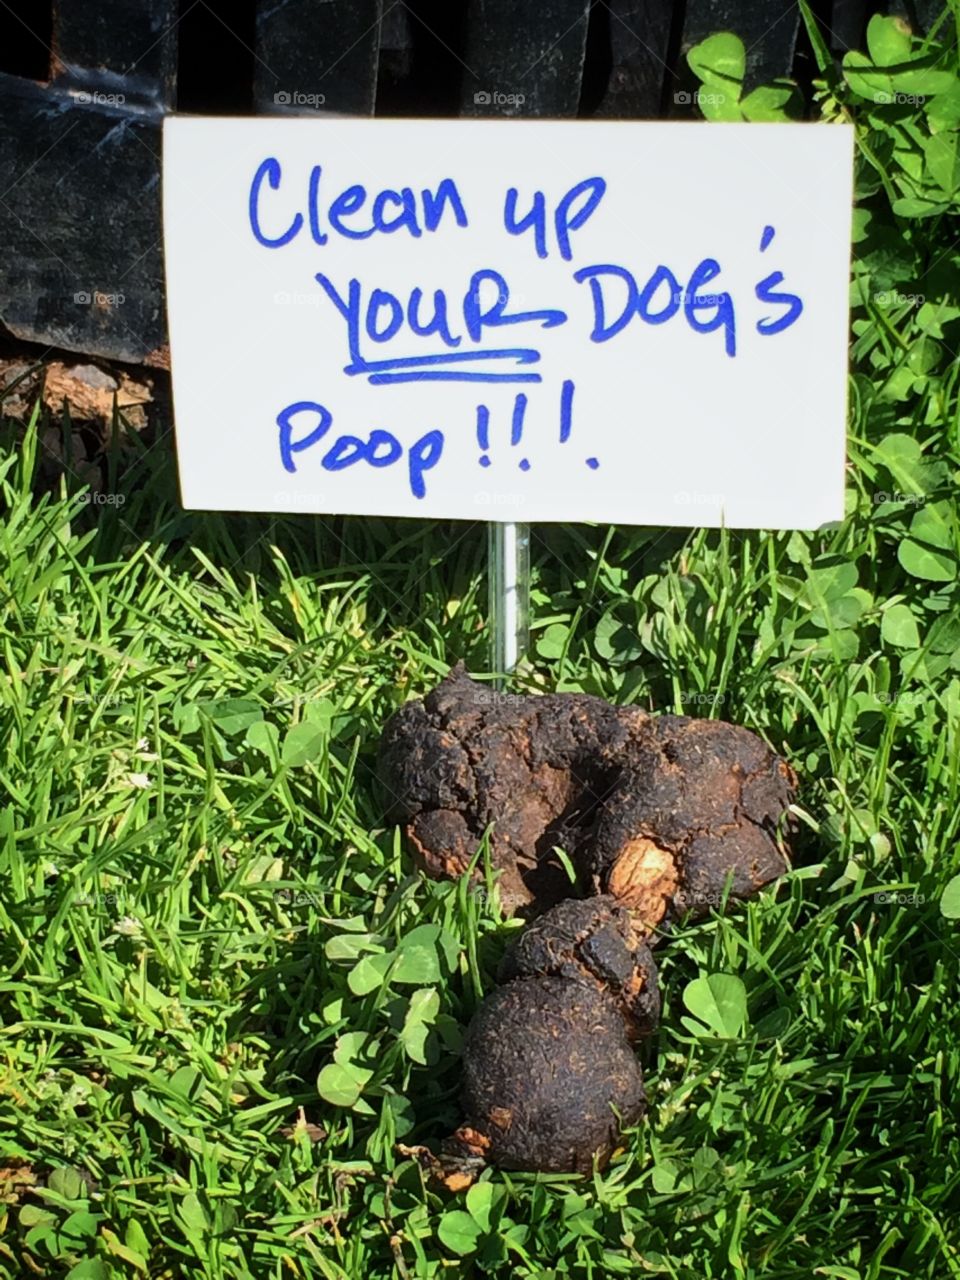 Dog poop with sign